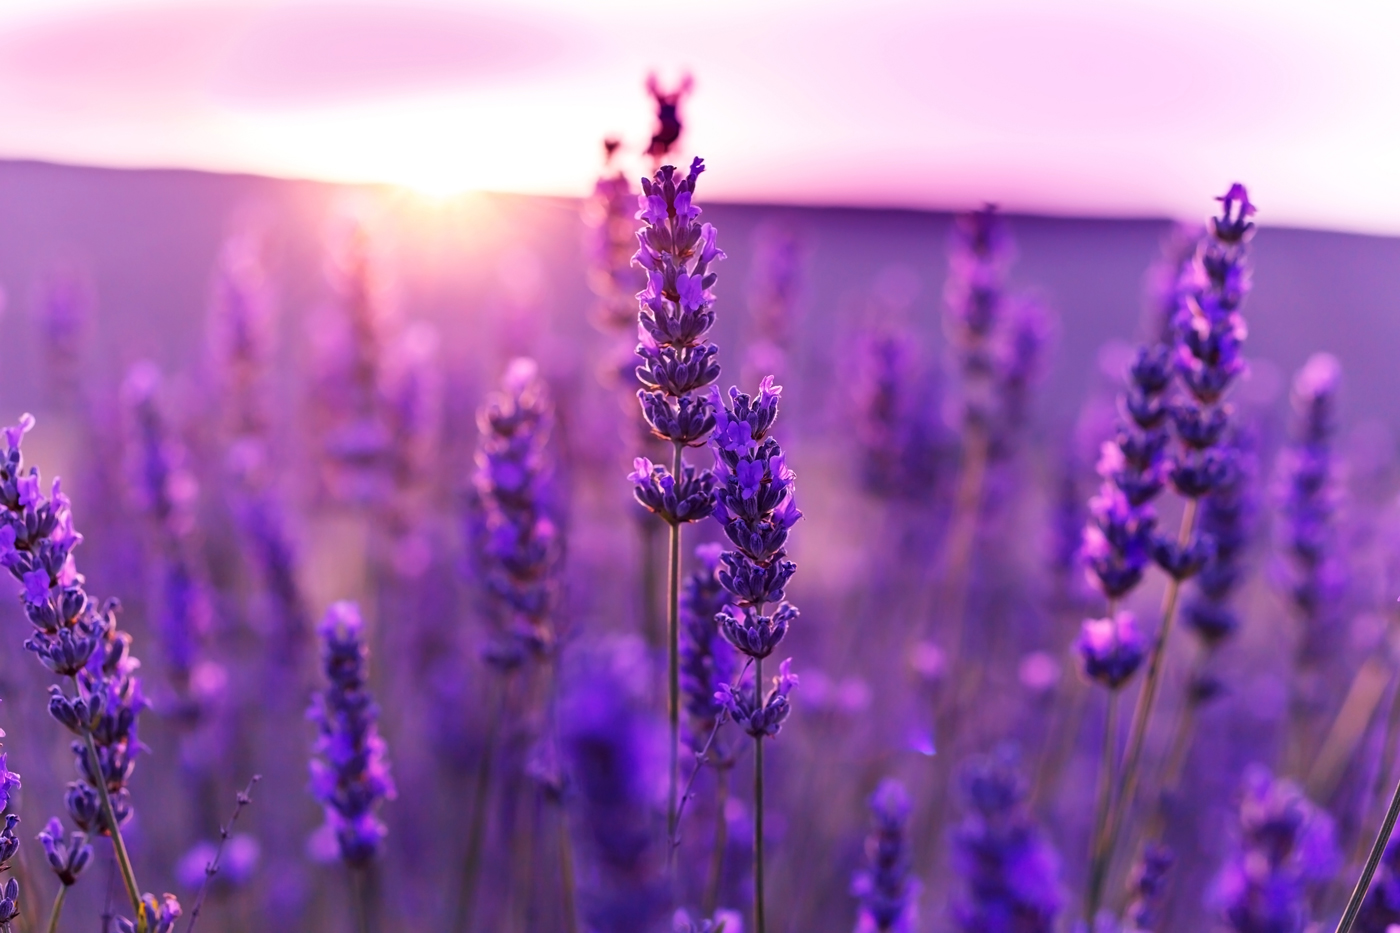 Growing Lavender in Missouri - Lavender can be a viable crop for Missouri,  but can also have some challenges. 2023 is the third year of lavender  research being conducted by specialists from